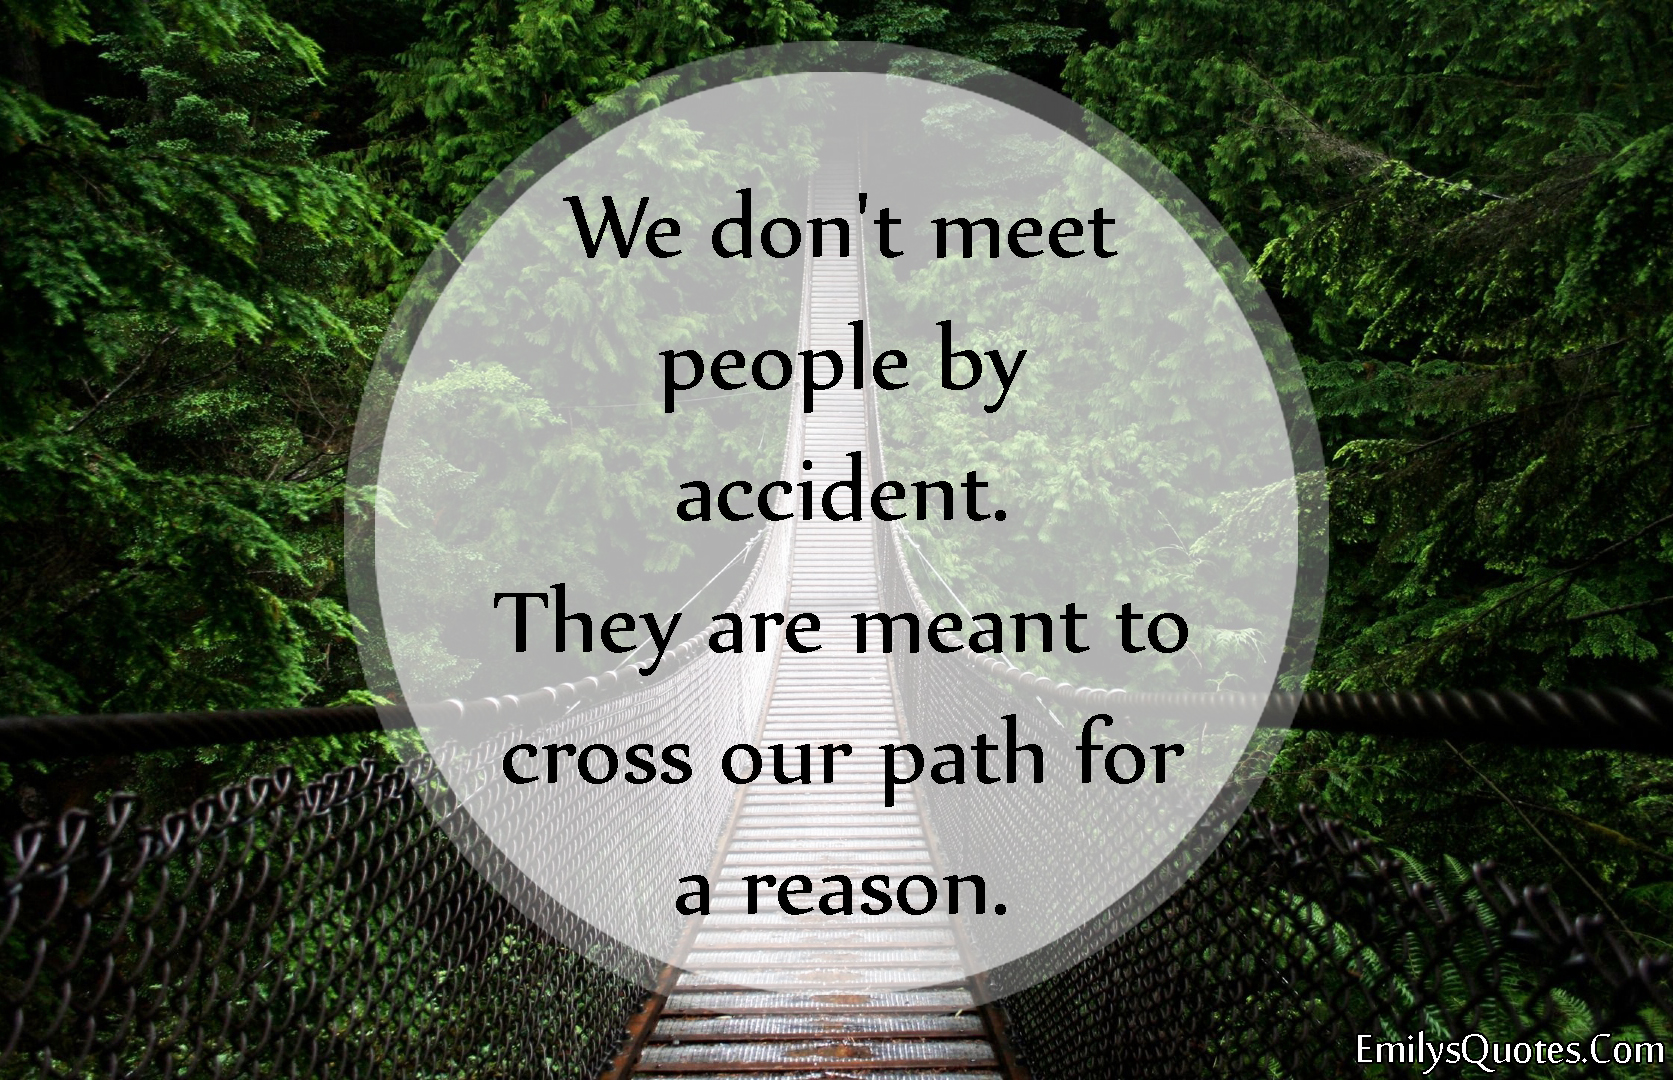 We don’t meet people by accident. They are meant to cross our path for a reason